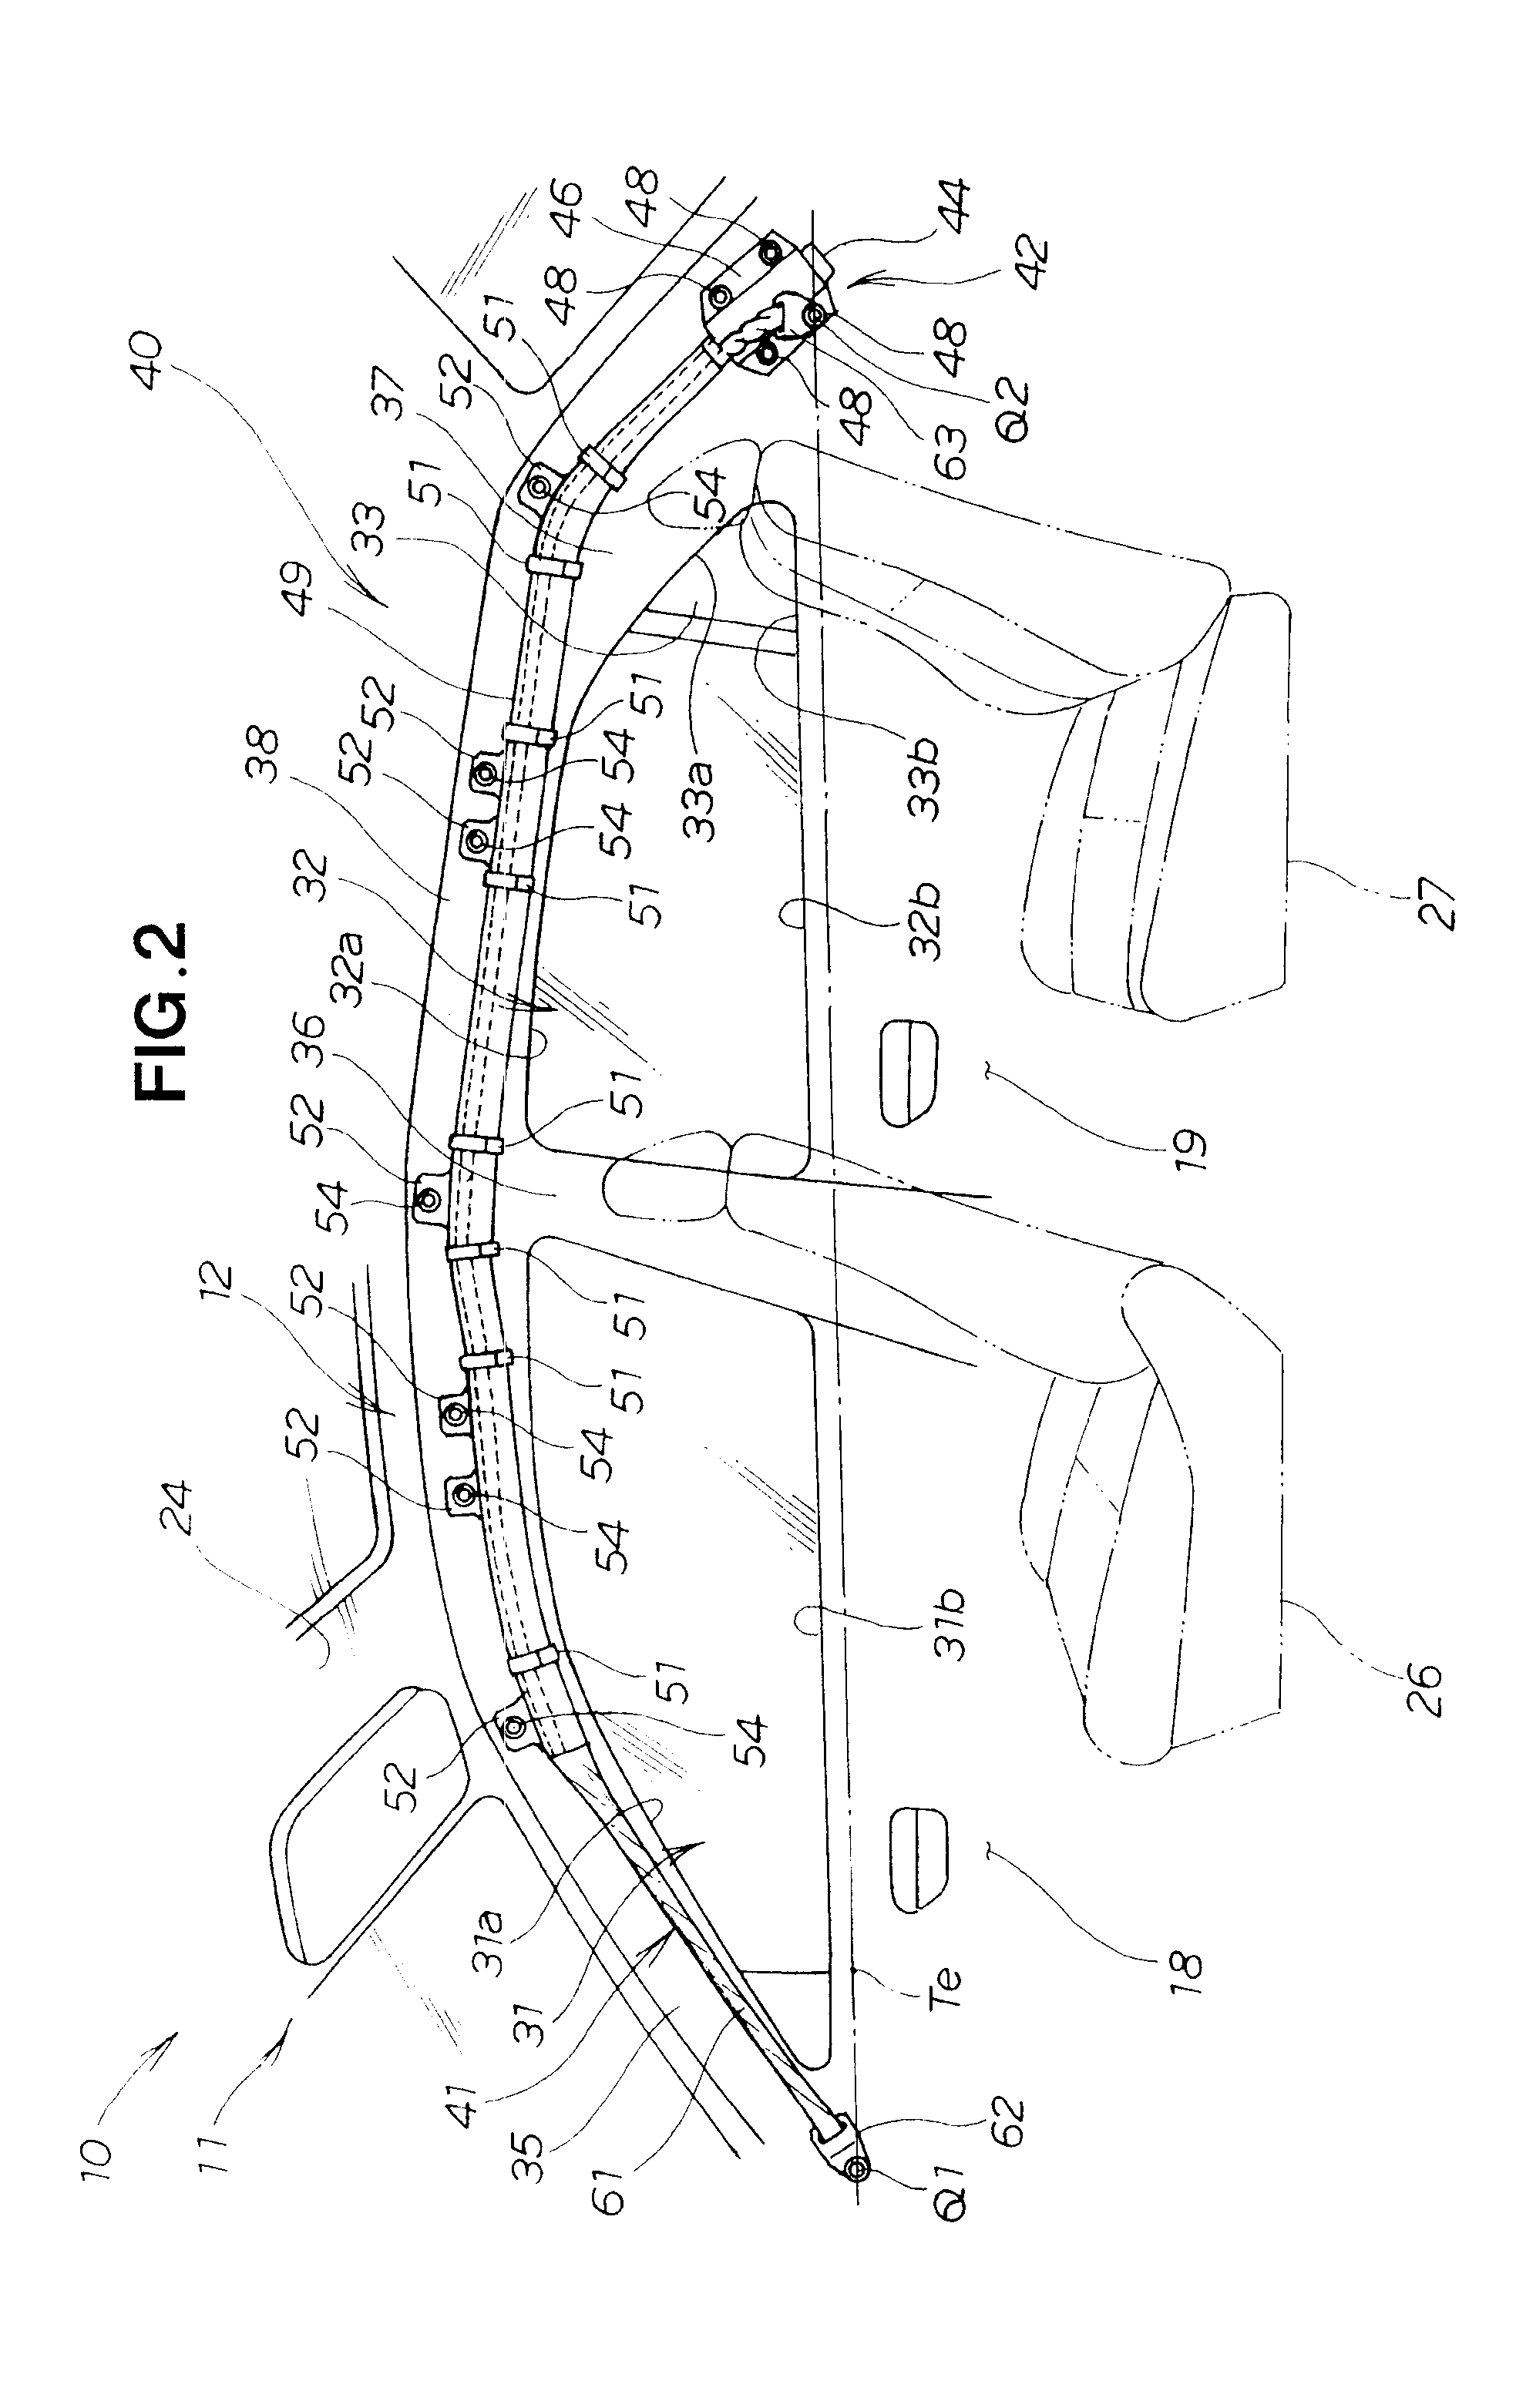 Vehicle occupant protection apparatus